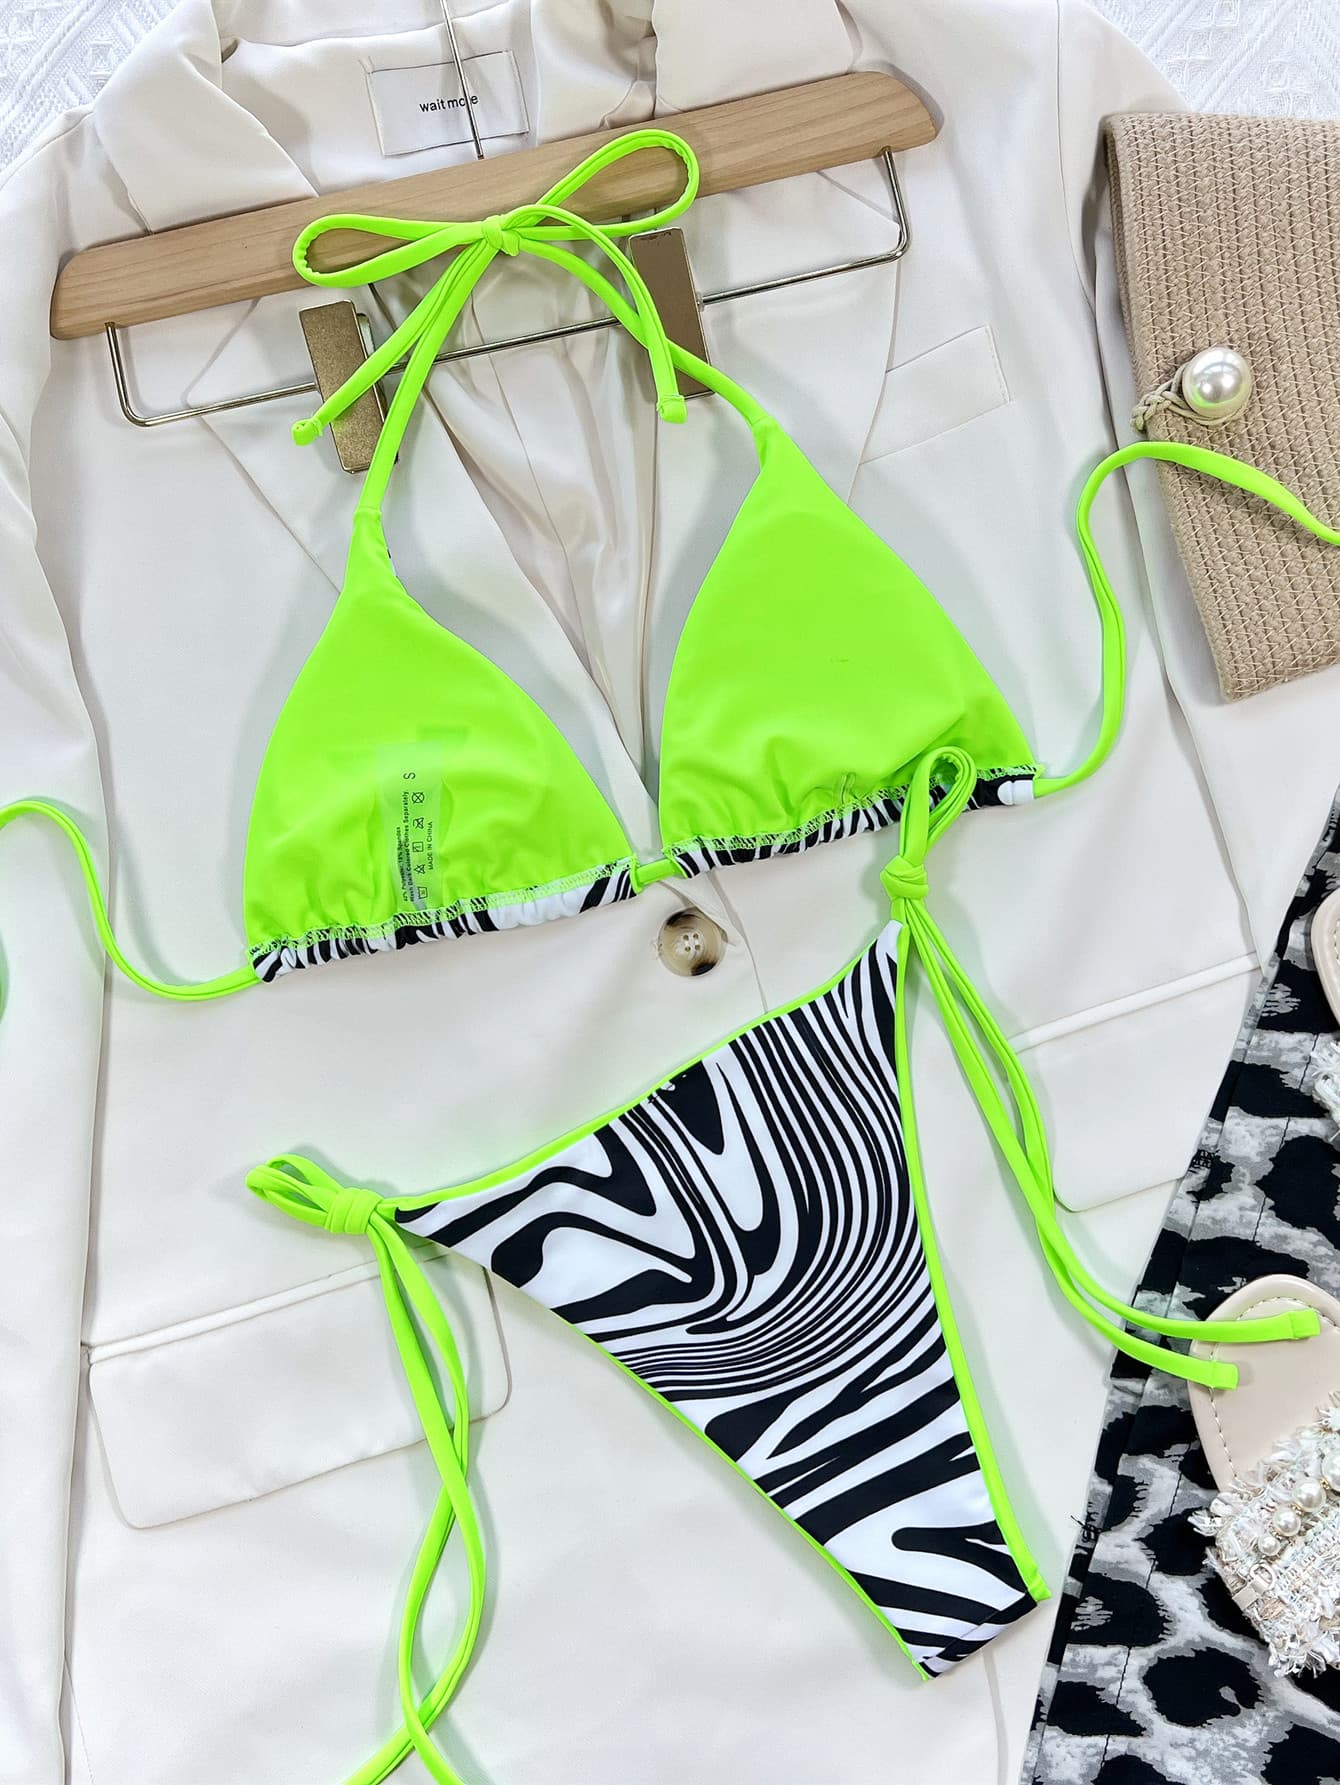 Explore our collection of trendy bikini sets. From classic to vibrant designs, get ready to hit the beach in style. Shop now and make a splash!